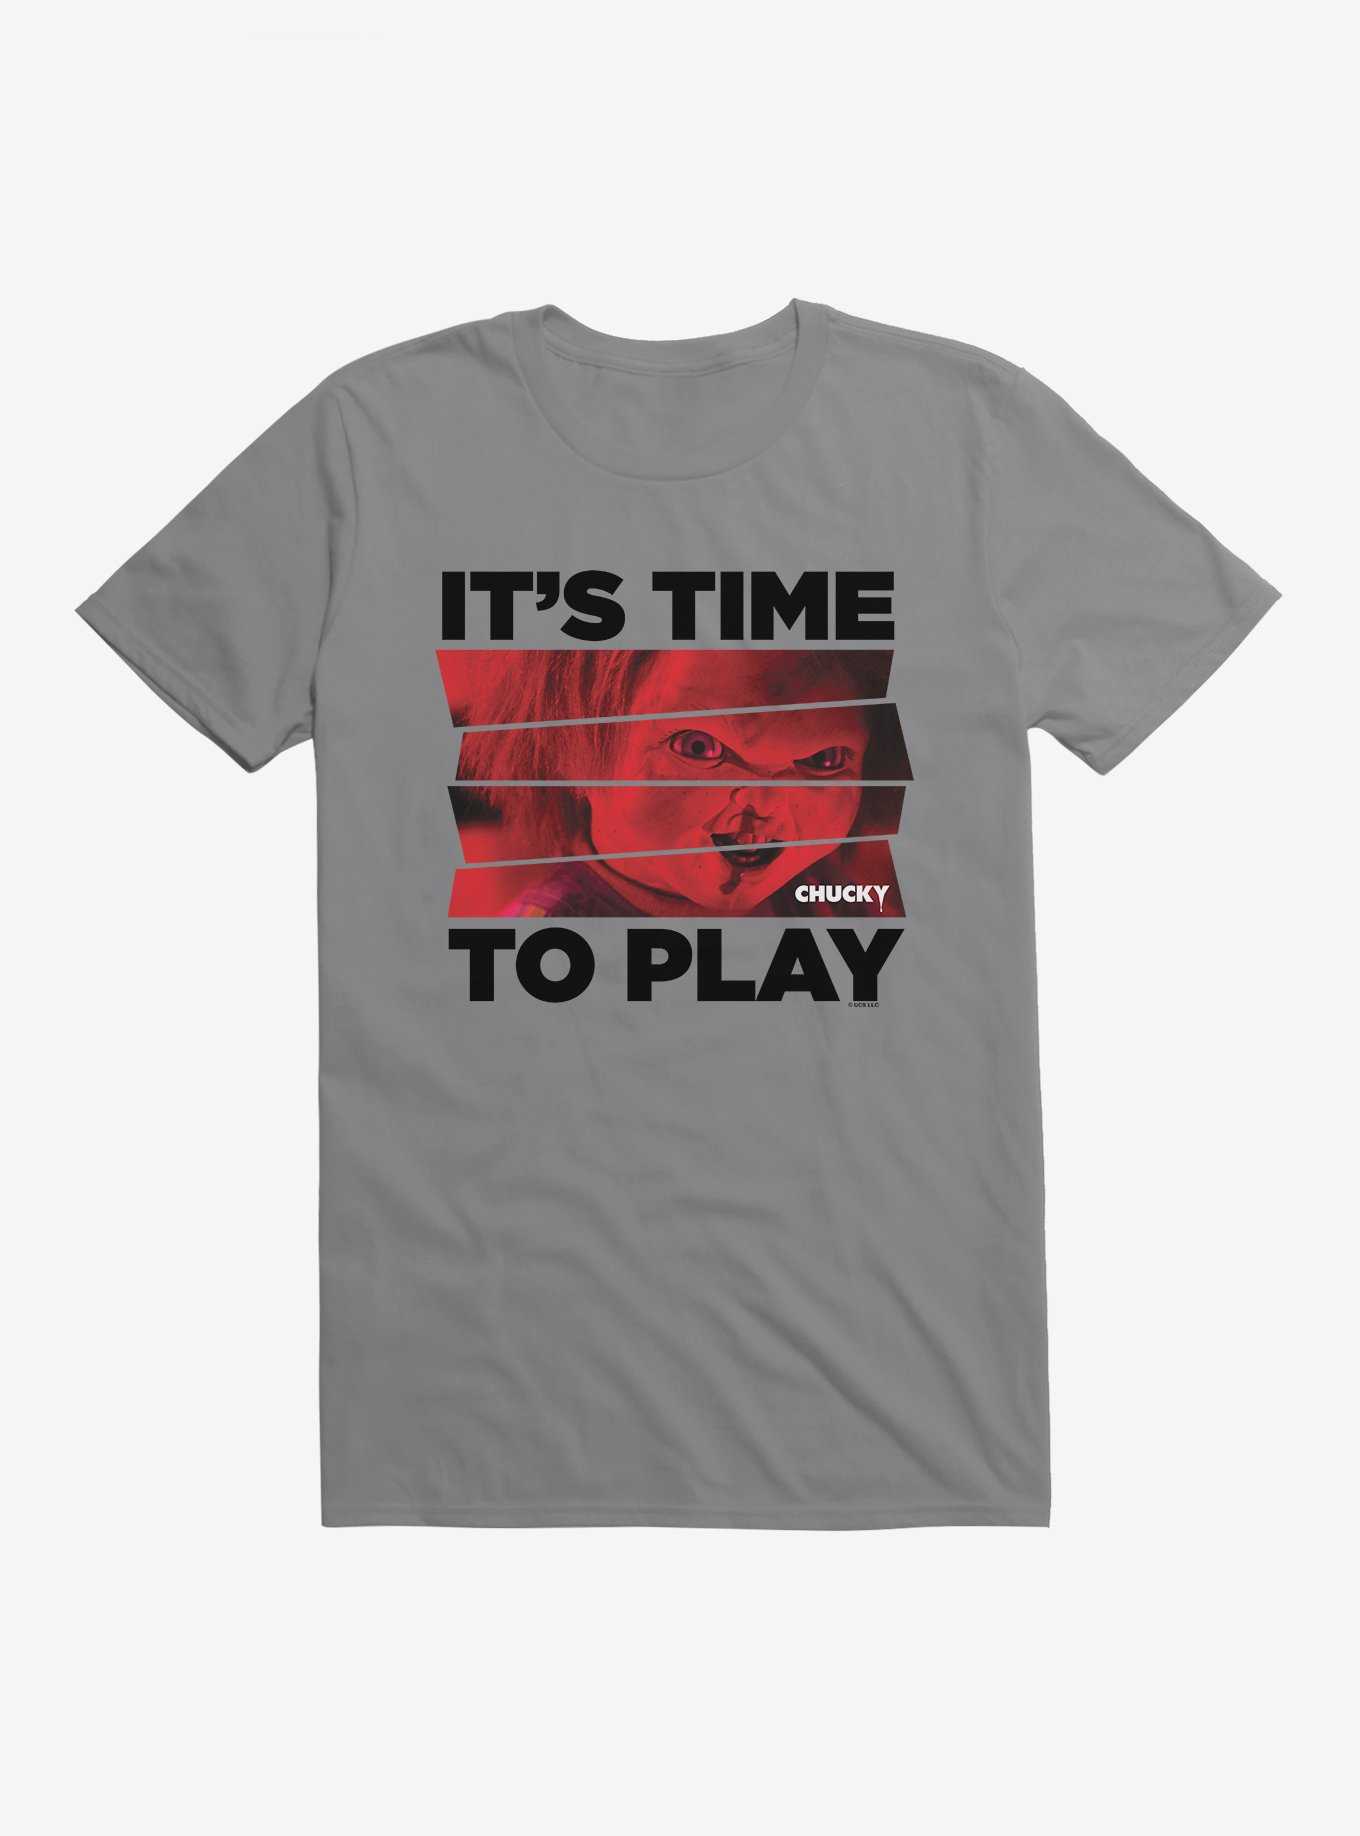 Chucky Time To Play T-Shirt, , hi-res